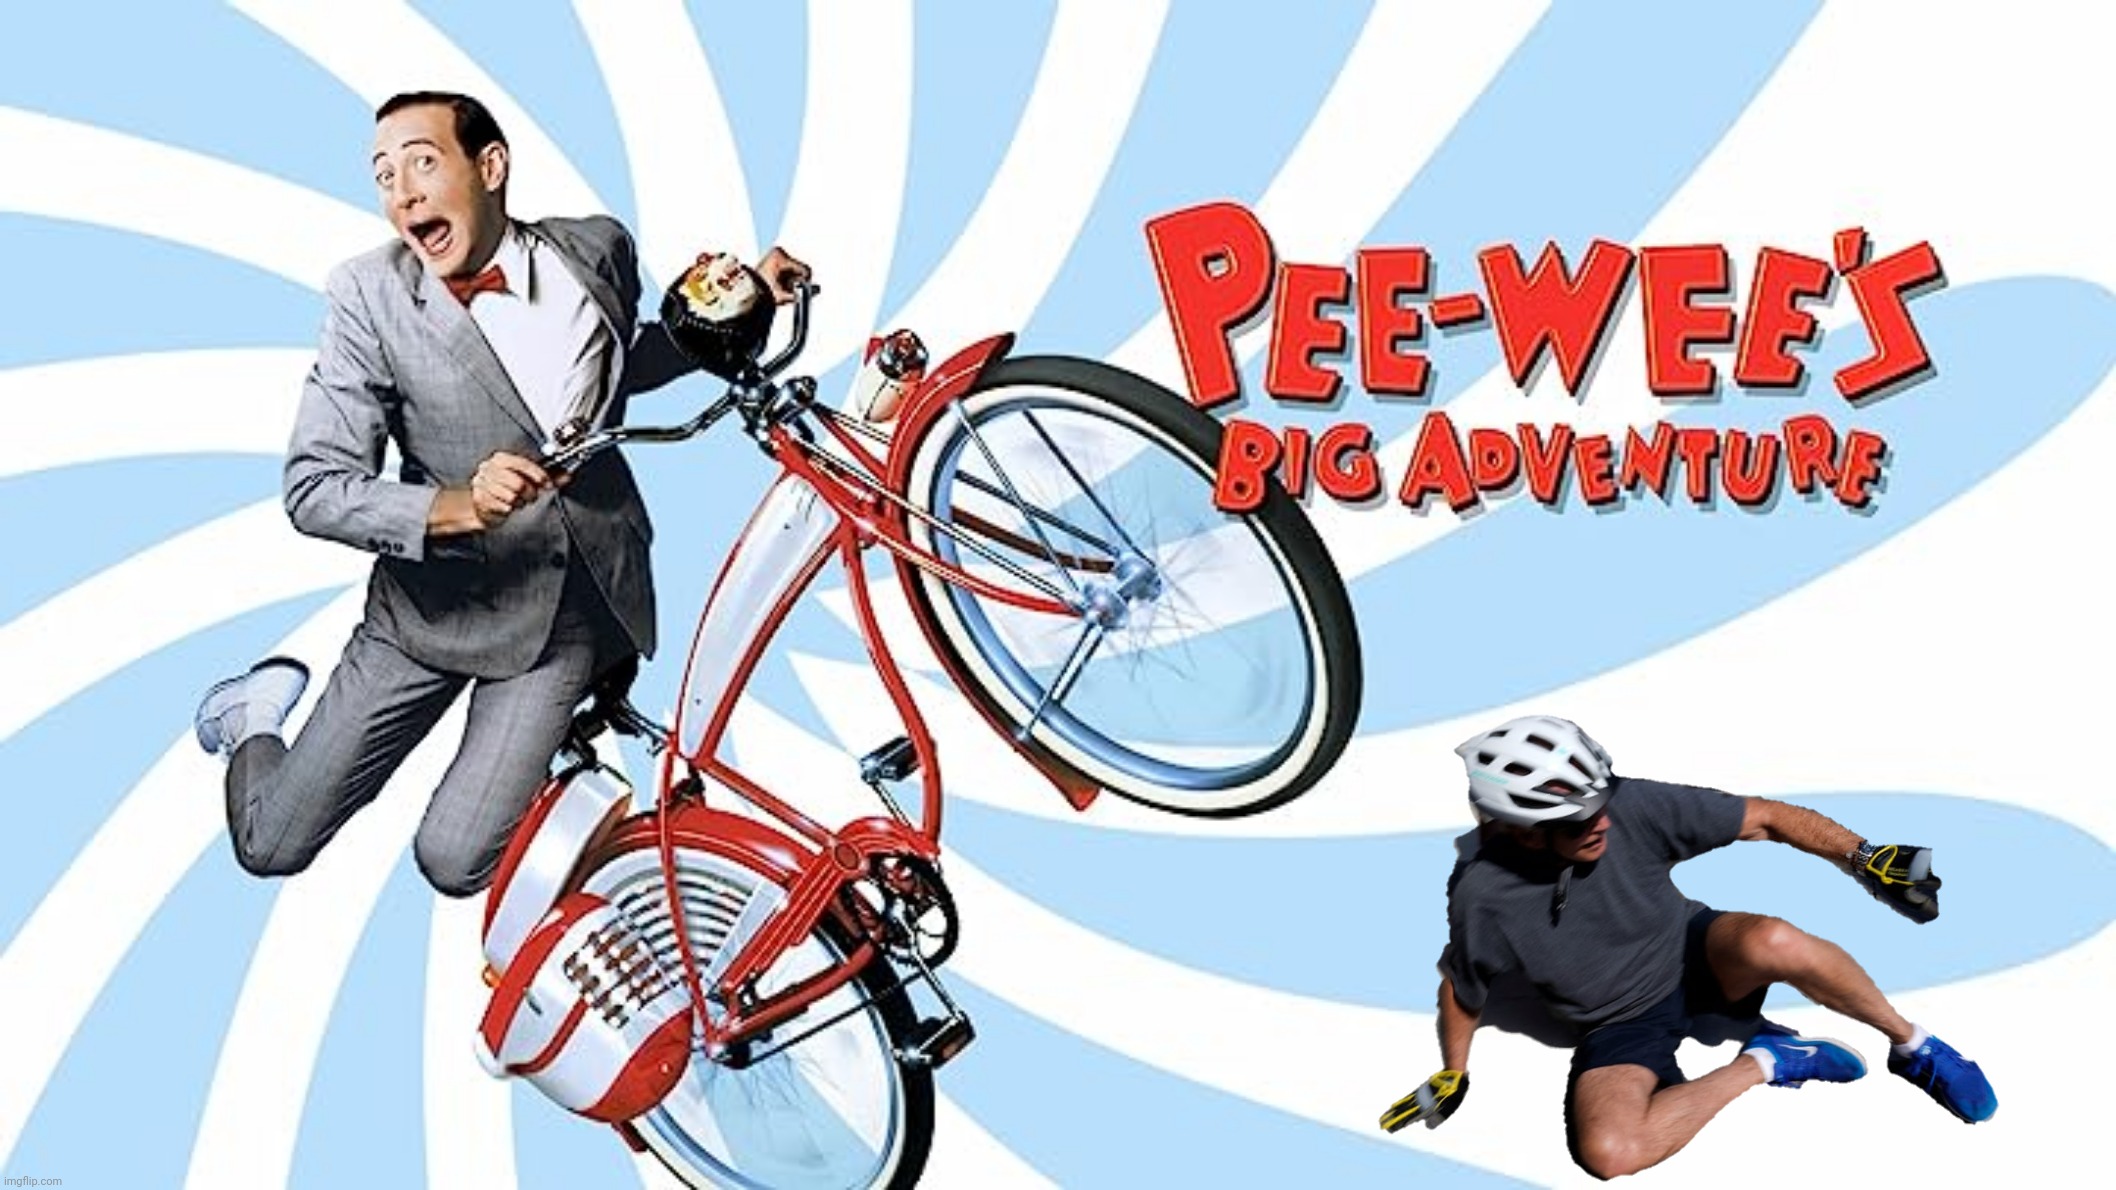 Bad Photoshop Sunday presents:  Now you know the rest of the story (R.I.P. Pee-wee) | image tagged in bad photoshop sunday,pee-wee herman,joe biden,pee-wee's big adventure,bike fall,bike | made w/ Imgflip meme maker